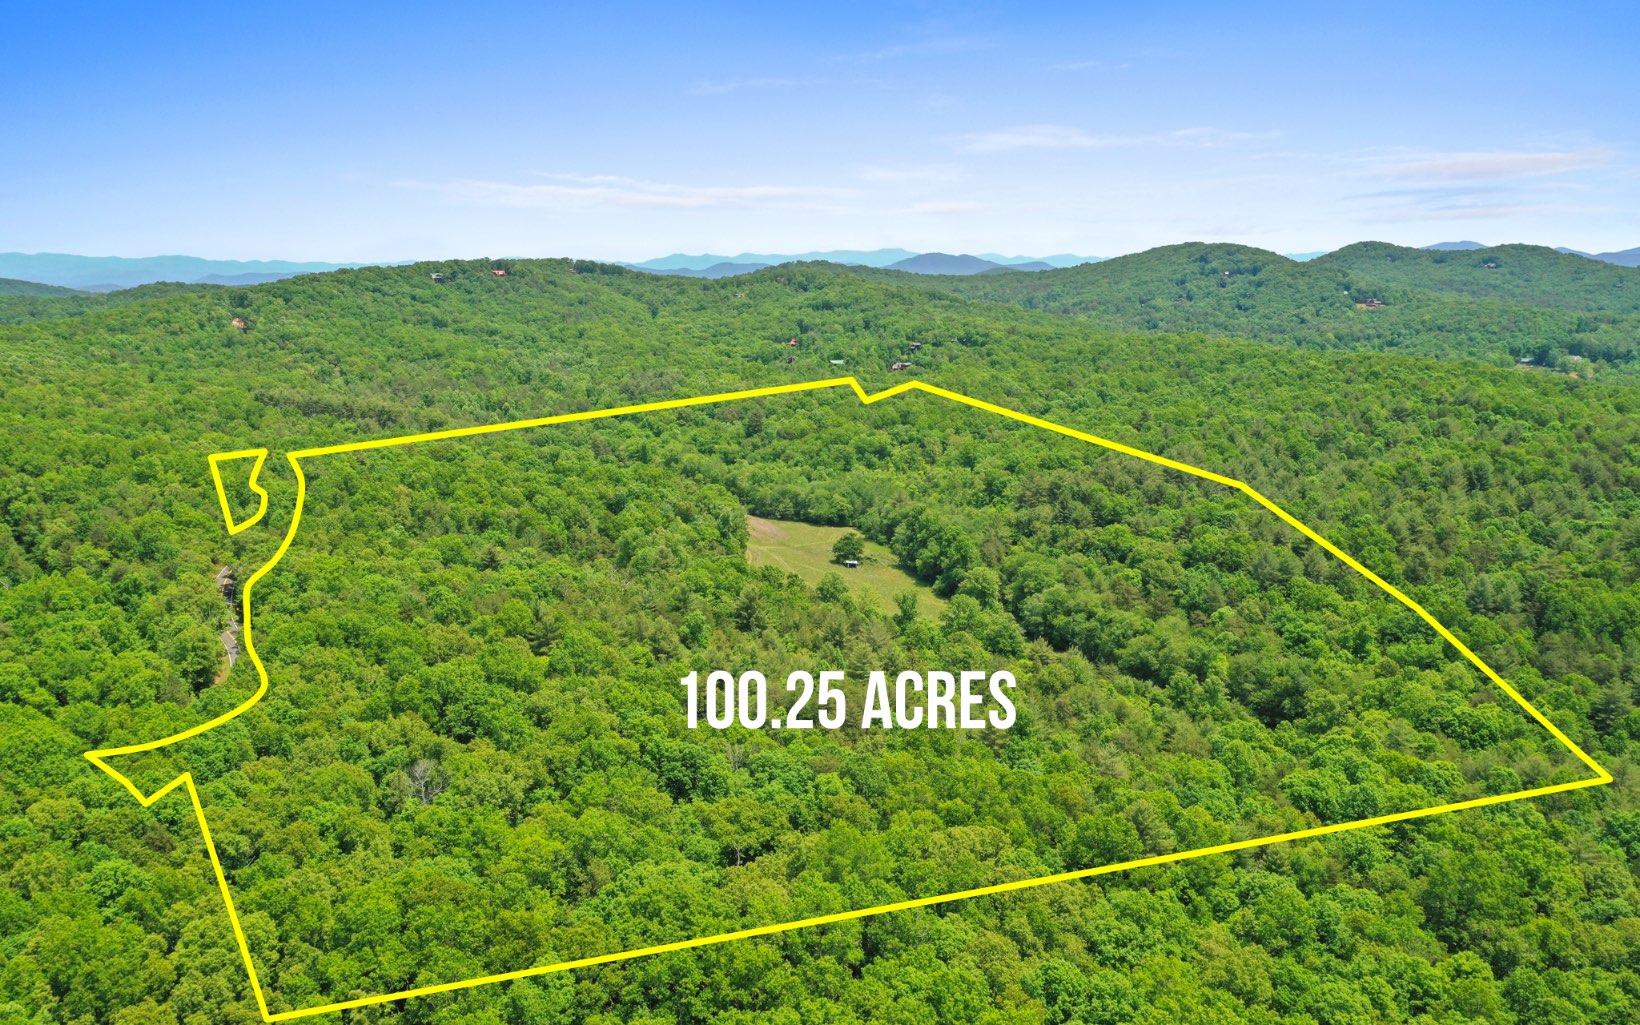 THE PERFECT INVESTMENT OPPORTUNITY! 100.25 ACRES OF GENTLE ROLLING TERRAIN. This beautiful property incorporates a pasture, mountain views and Bryan's creek flowing through the property making it an ideal investment for a private development or an amazing estate with plenty of room to roam. This multifaceted property is partially wooded and is perfect for a large farm that may include beautiful floral and vegetable gardens. COME AND SEE IT FOR YOURSELF...THE POSSIBILITIES ARE ENDLESS. t